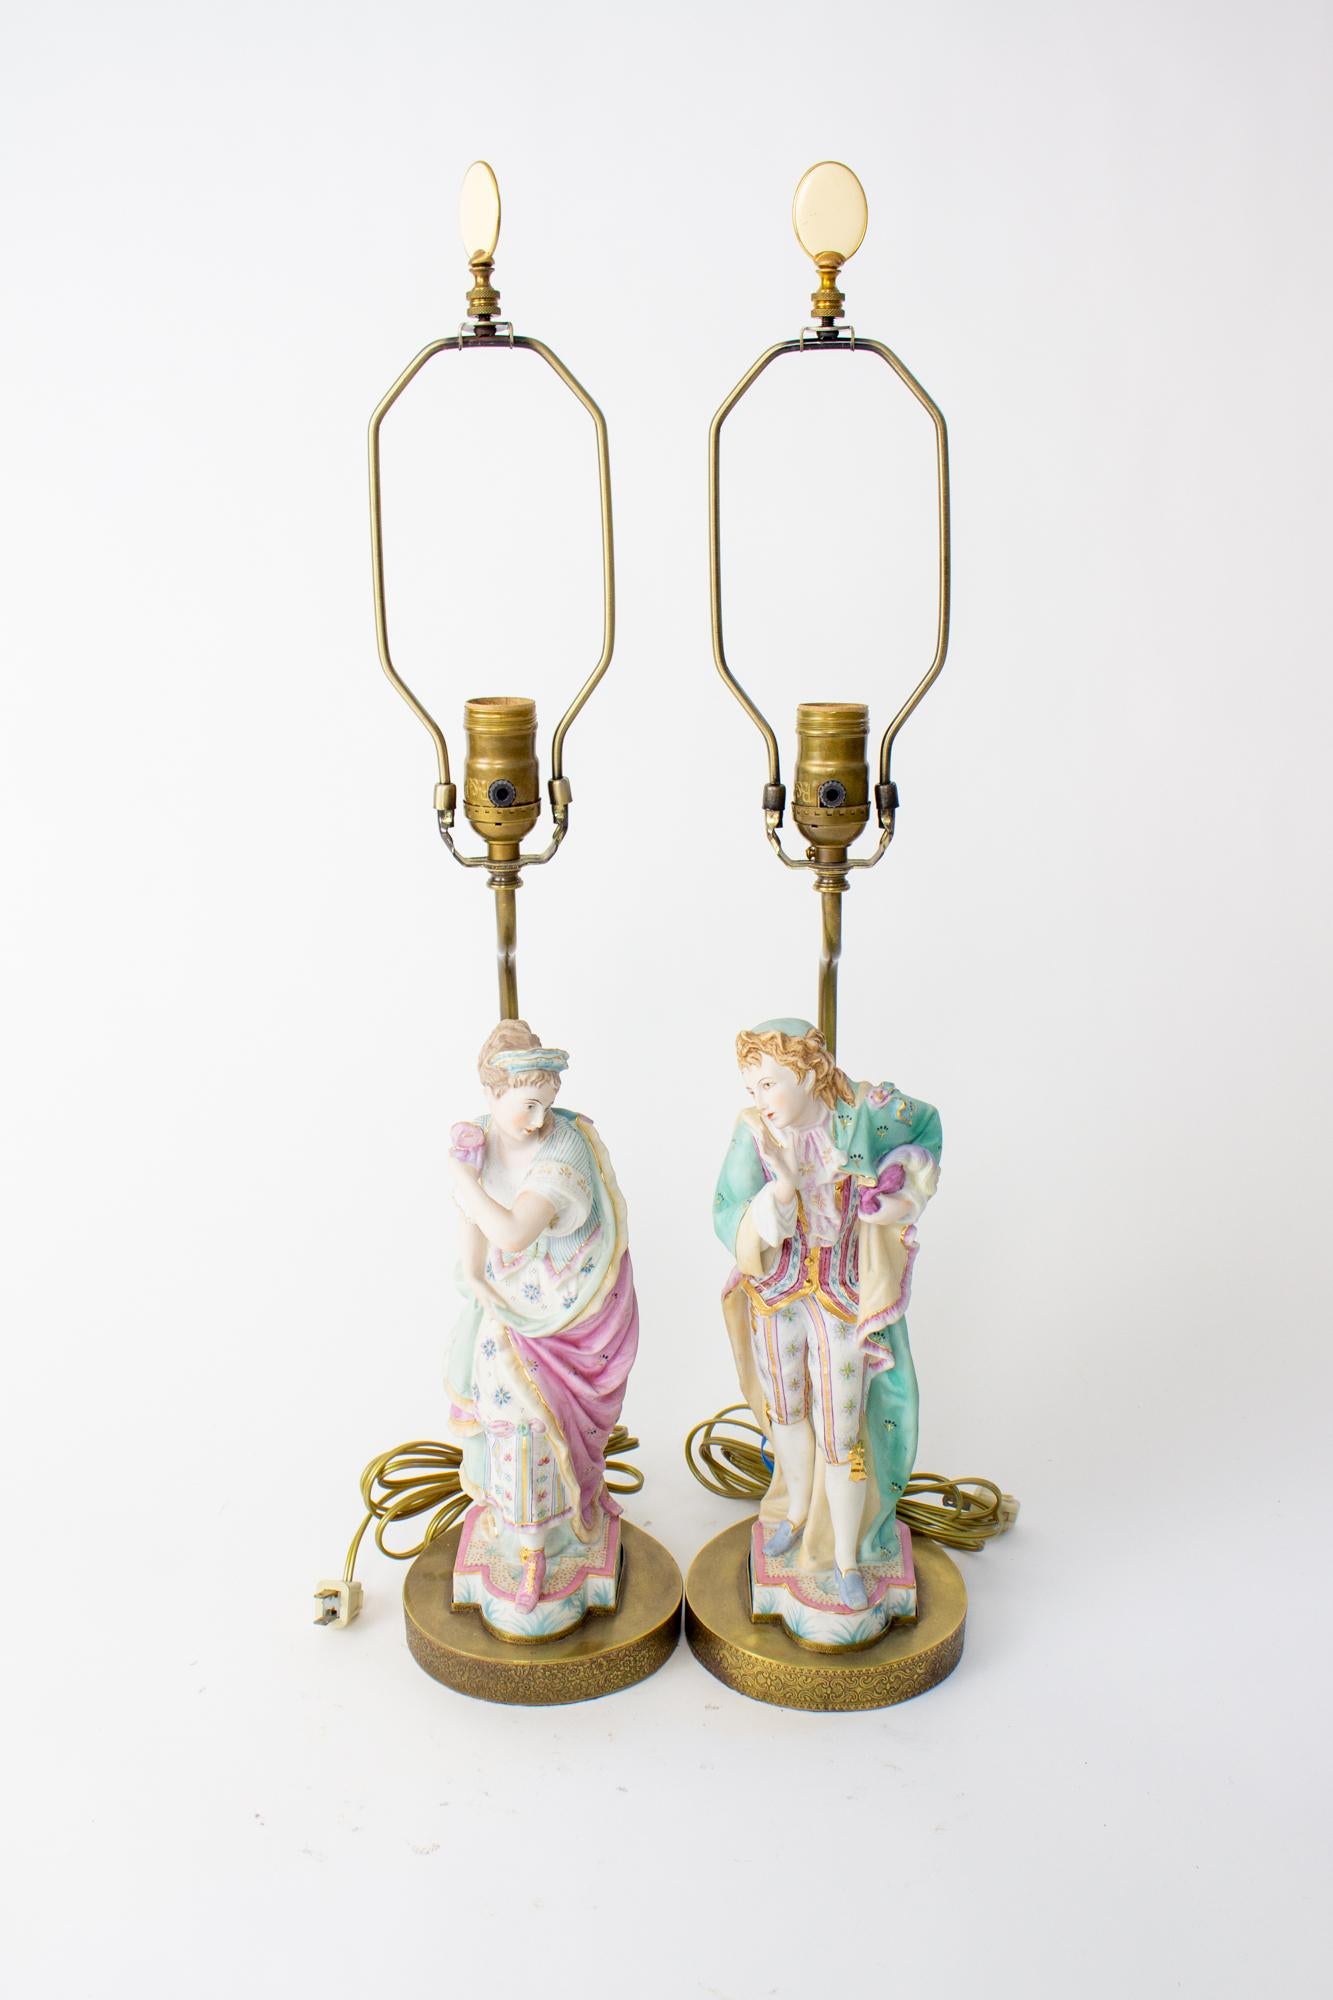 Mid 20th century masquerade bisque figurine lamps. A pair featuring a man and a woman in pastel tones, the woman wearing a pink cape and the man wearing a turquoise cape, both holding masks as they reveal their faces. Bisque or kalk porcelain,